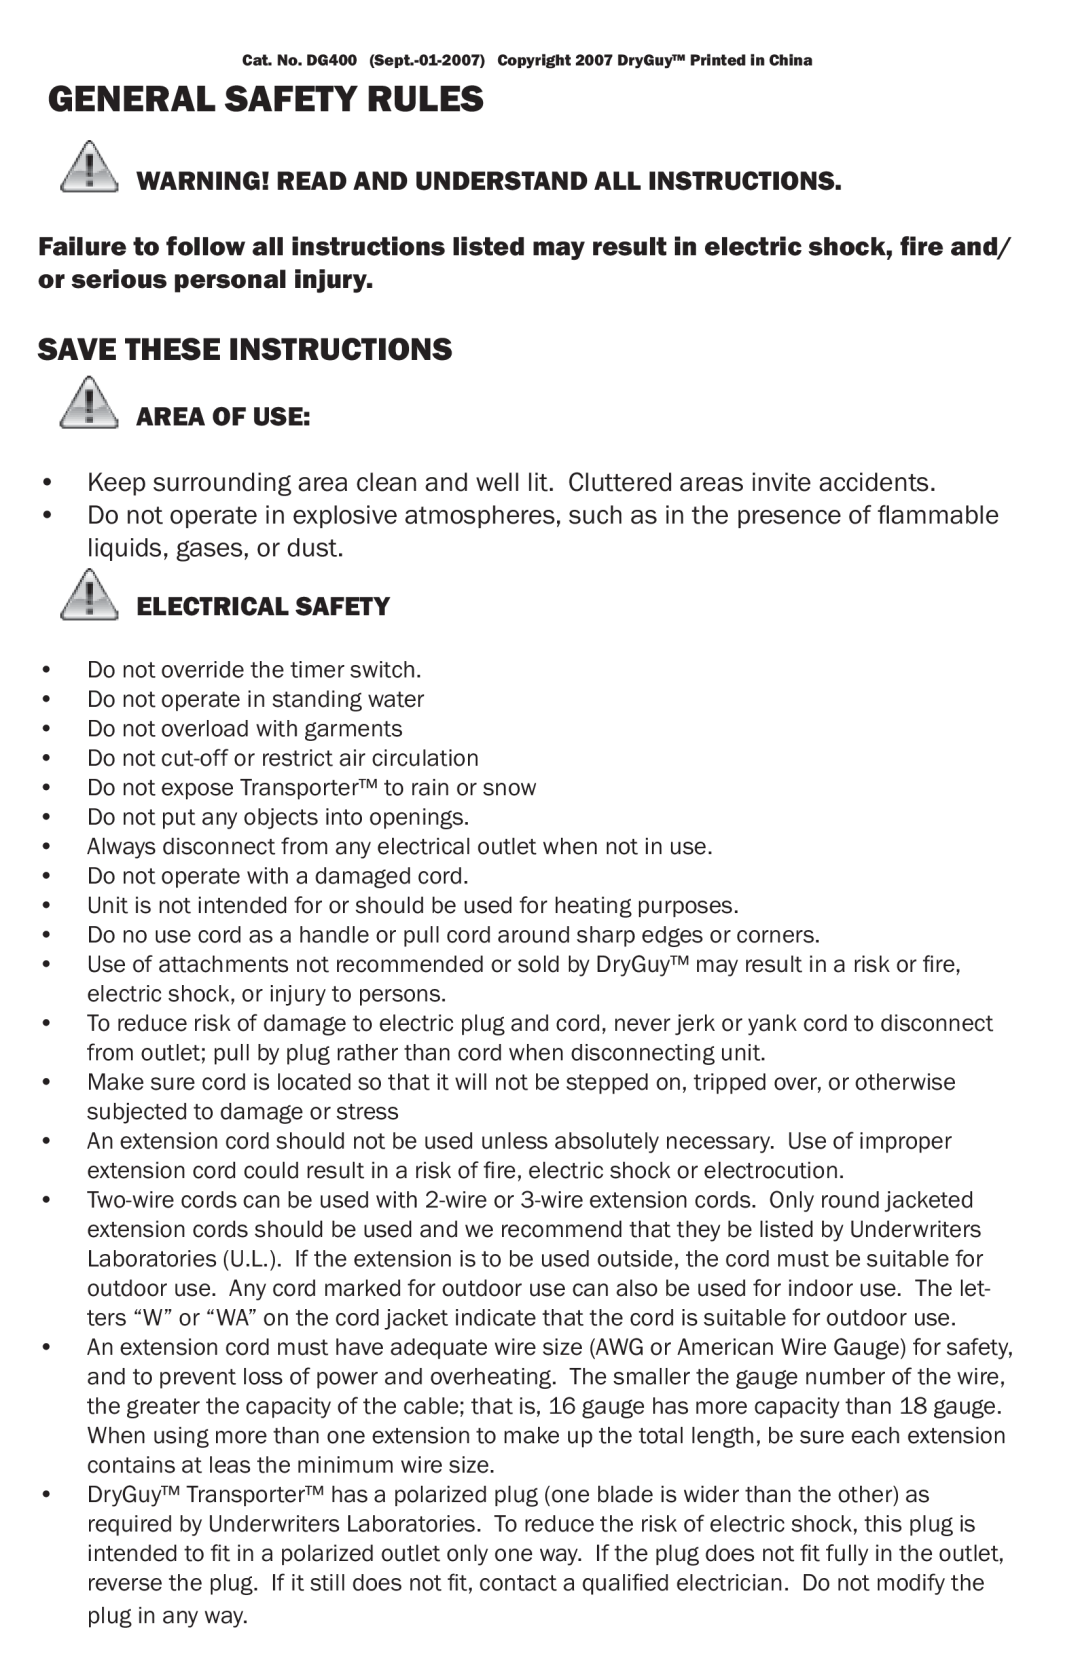 DryGuy DG00401 General Safety Rules, Save These Instructions, Warning! Read And Understand All Instructions, Area Of Use 